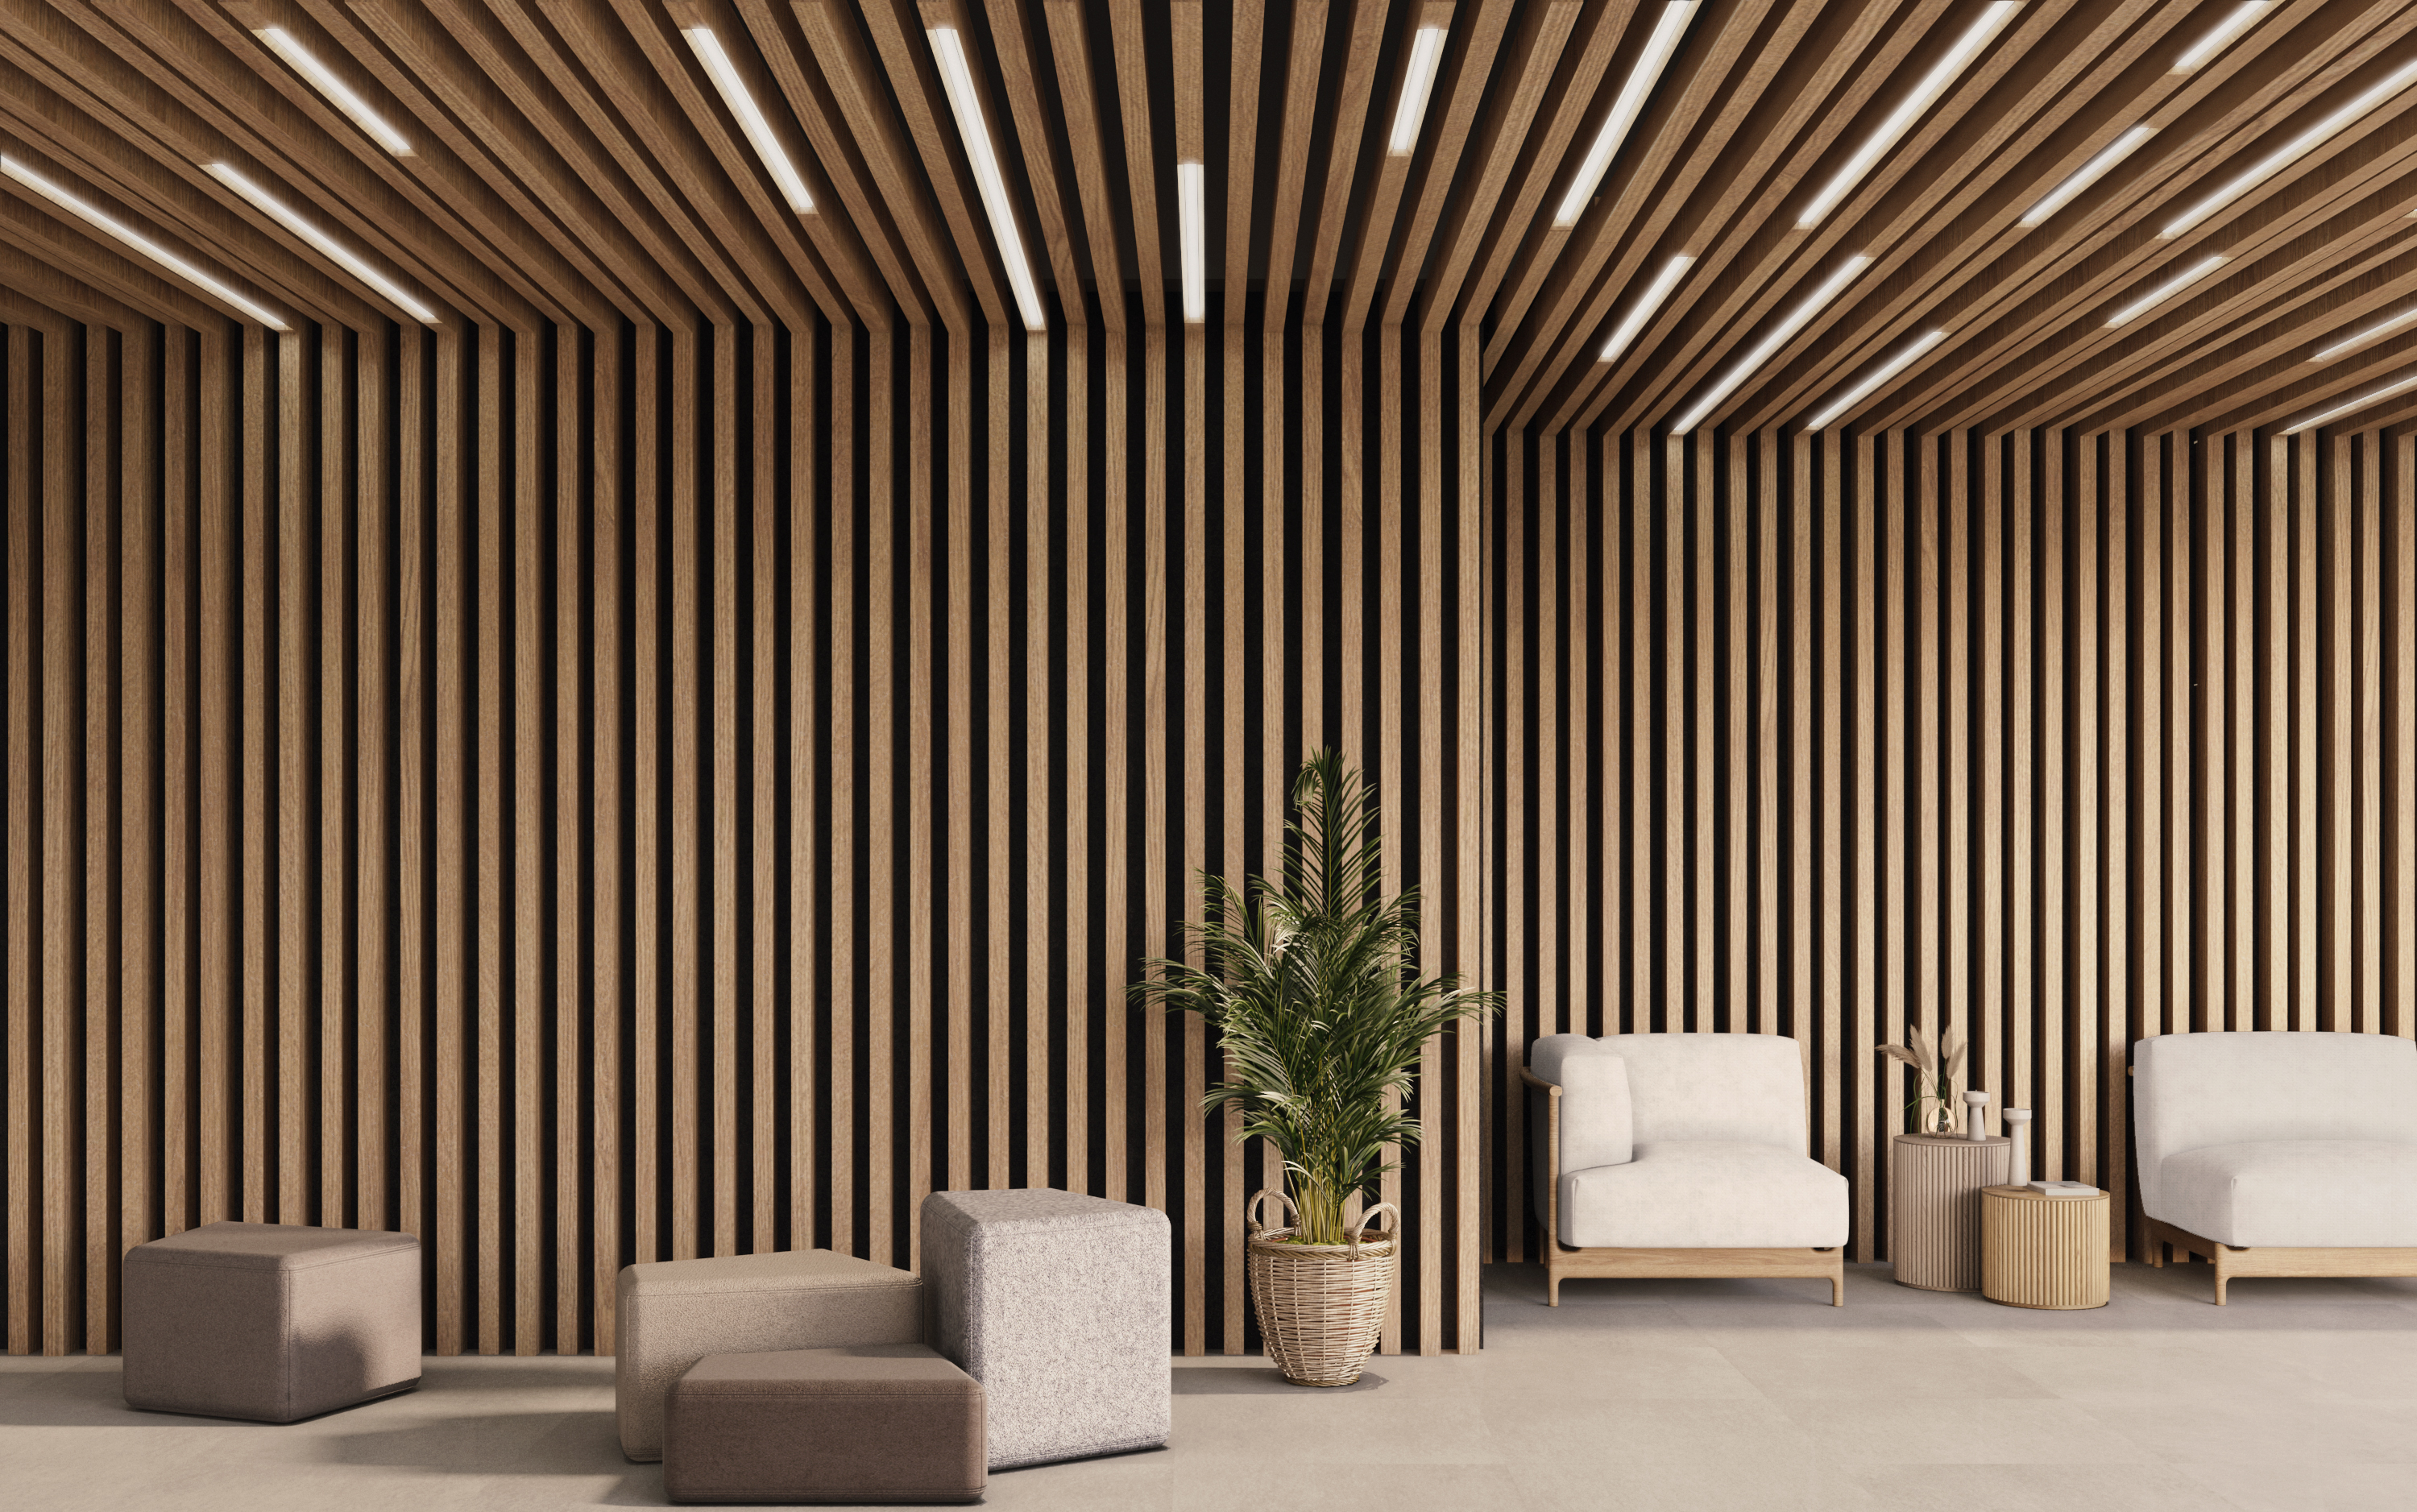 Surfaces Folded 016: An elegant office adorned with PET felt material wooden walls.